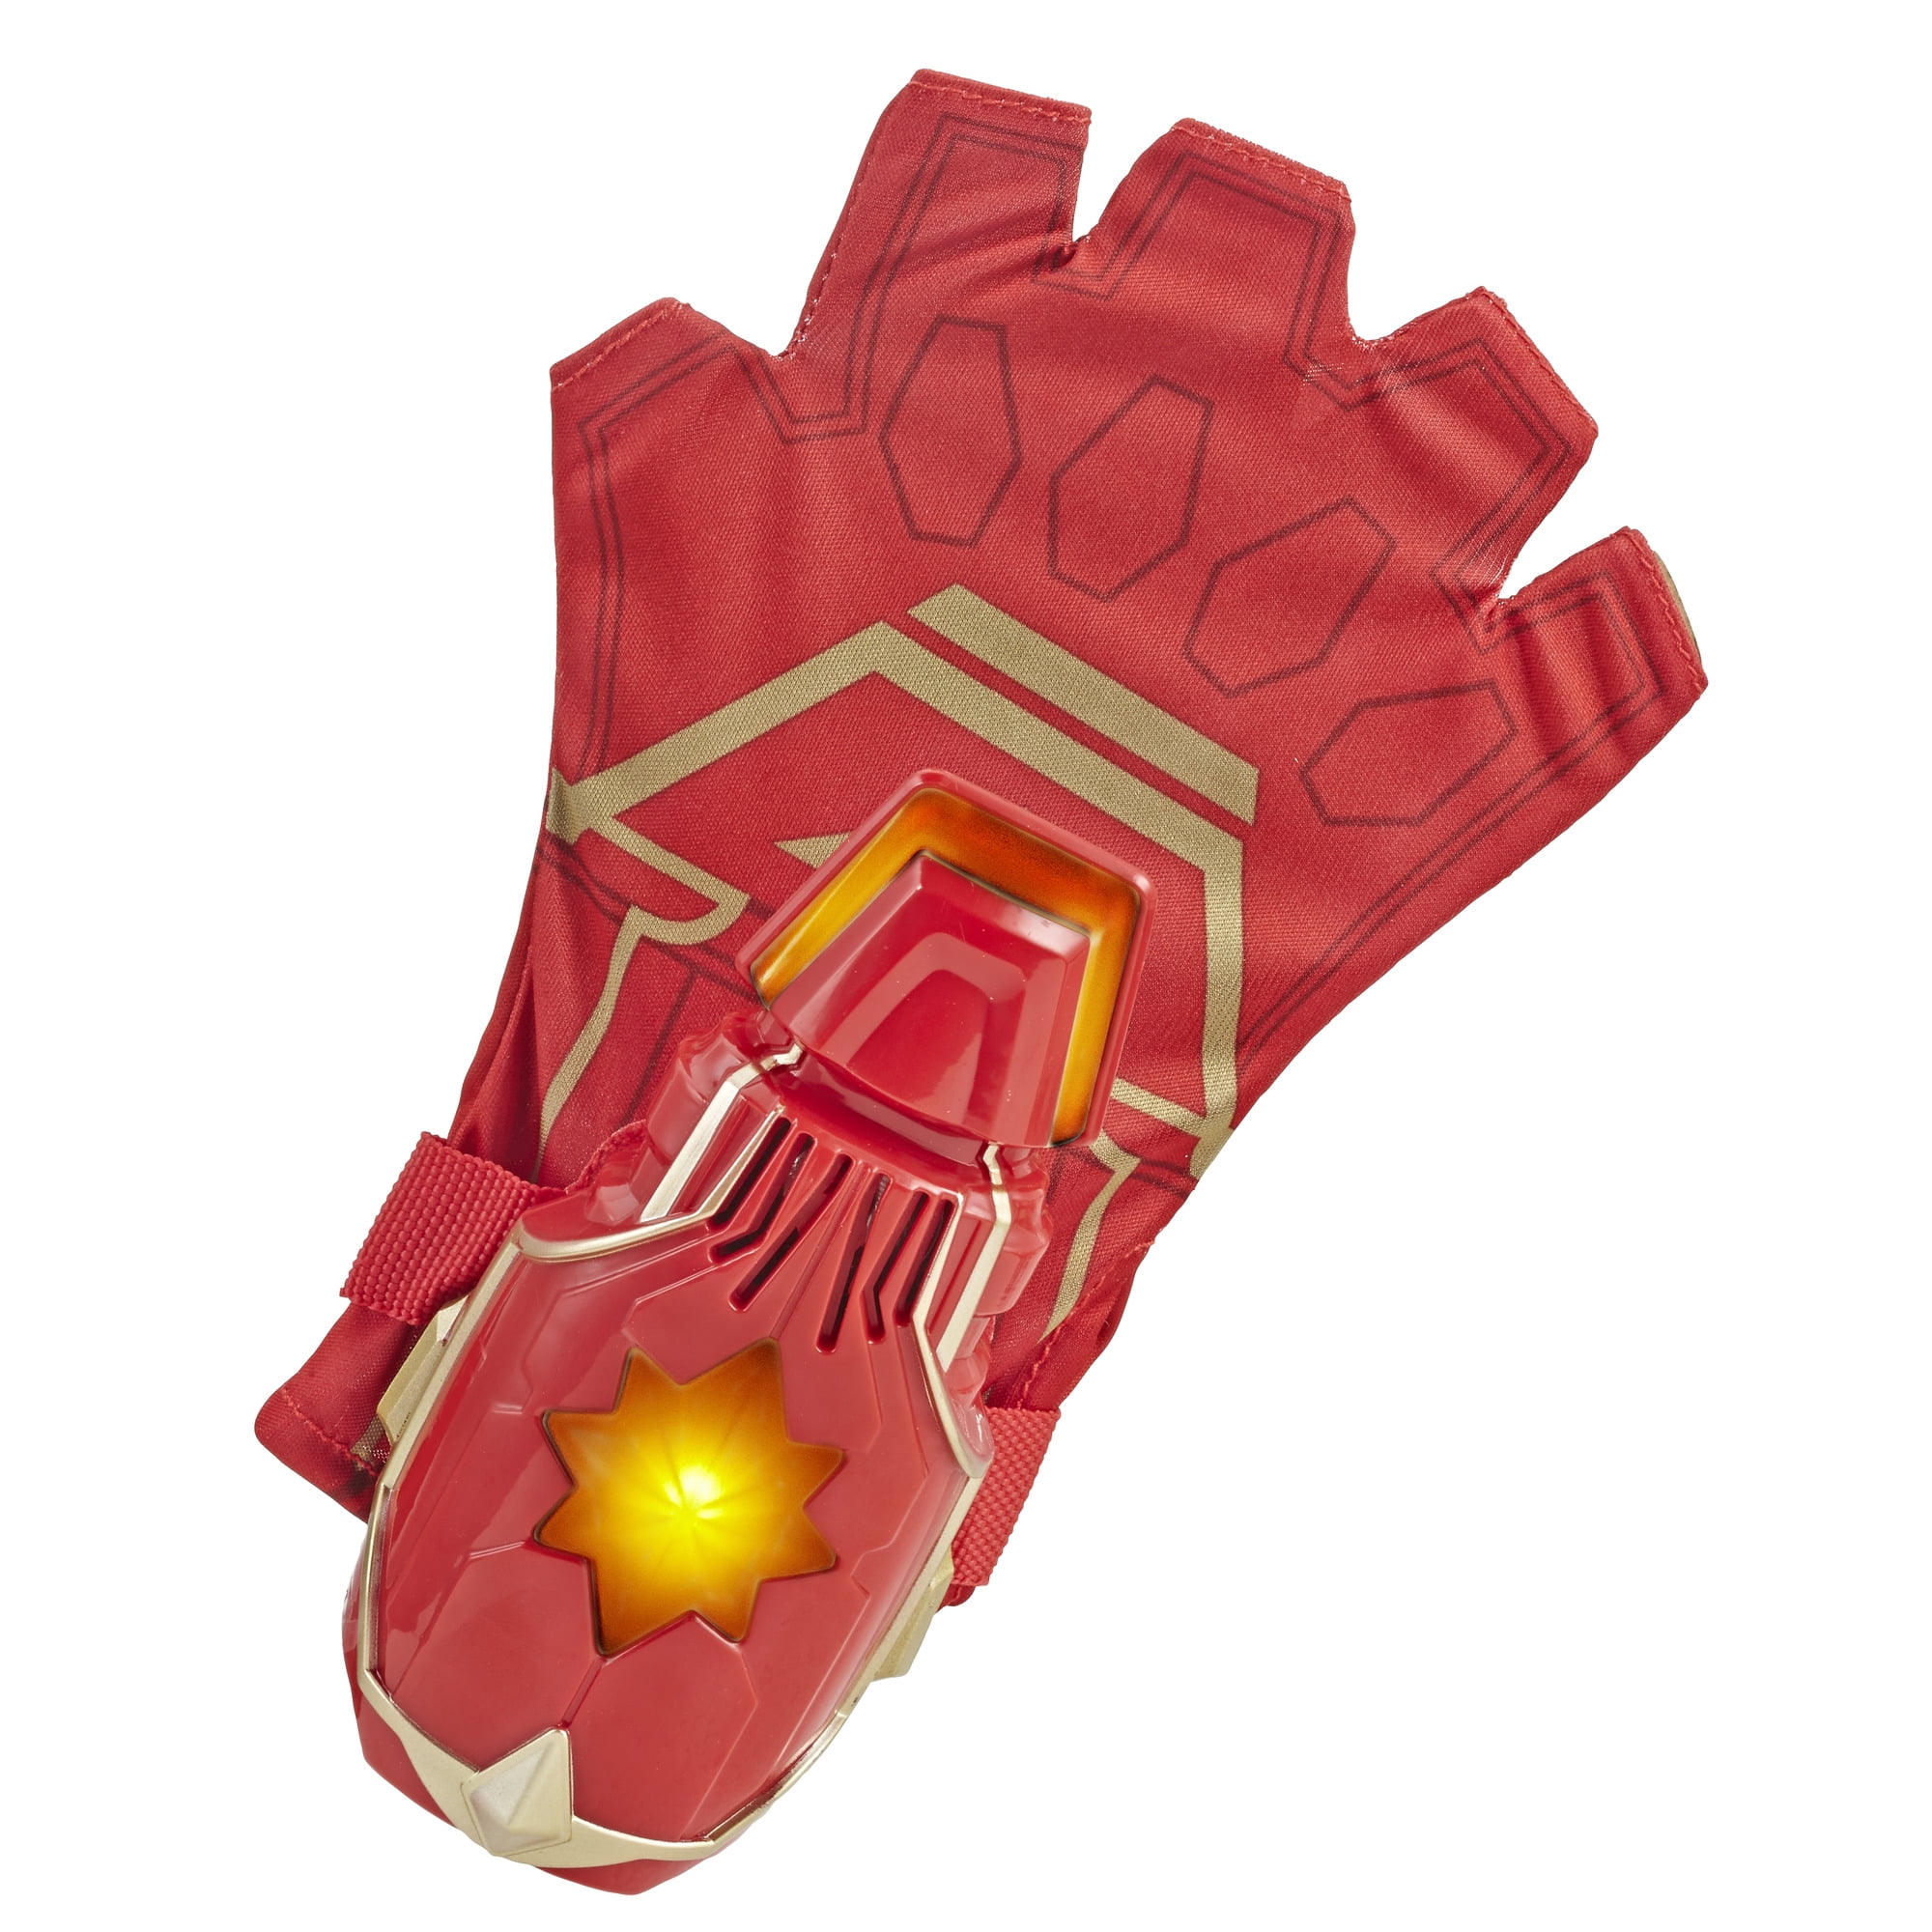 Captain Marvel ADULT Gloves Costume Accessory NEW